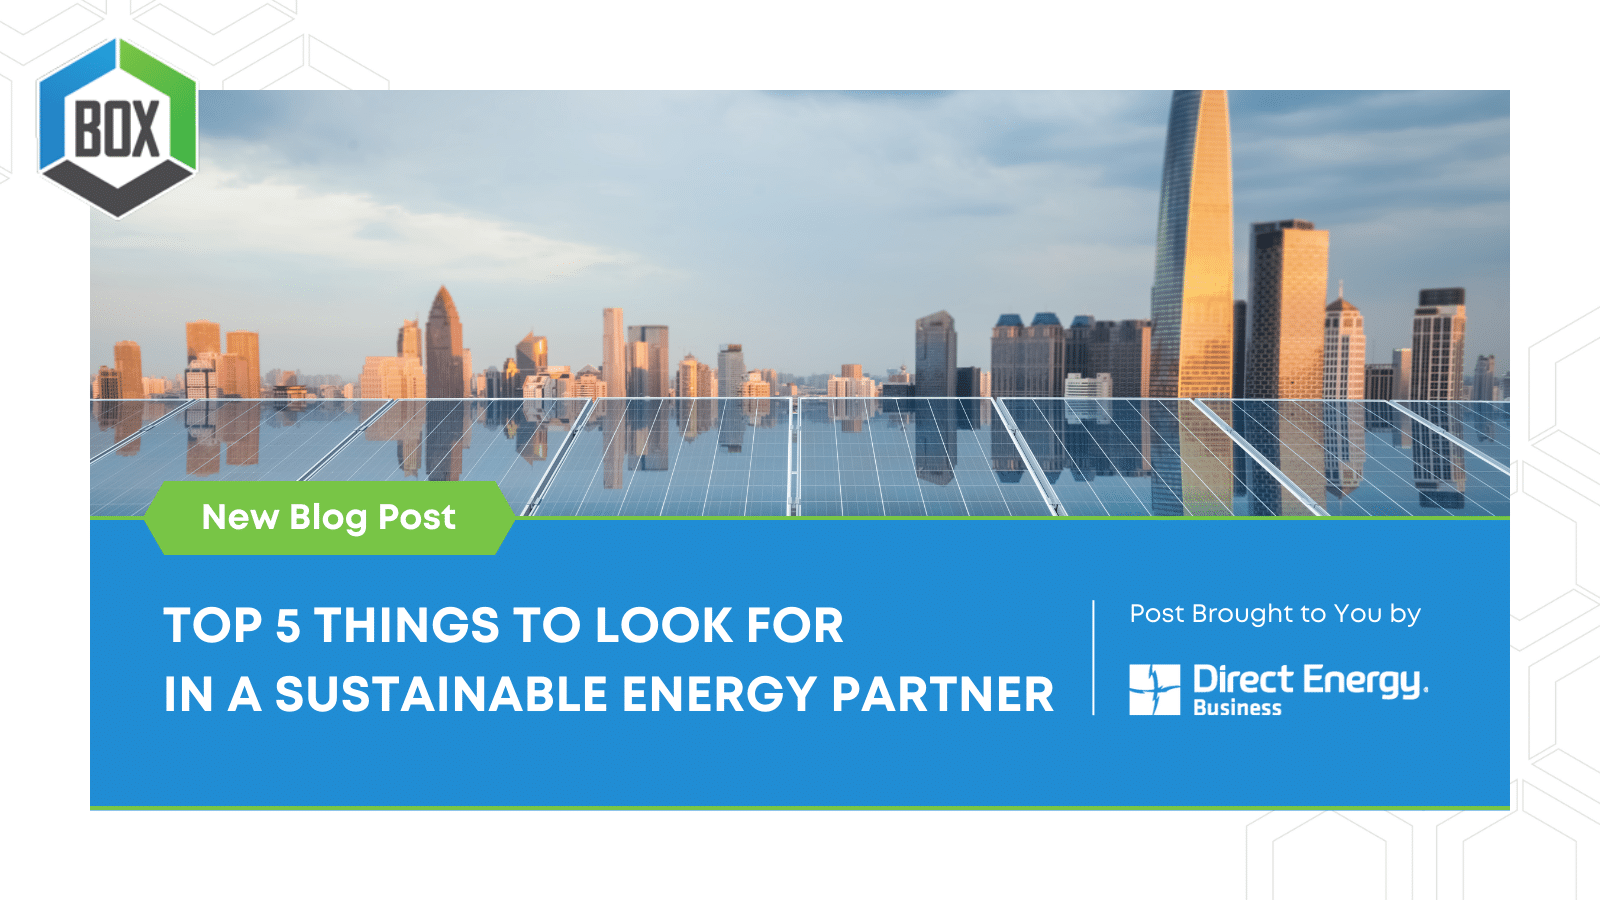 Top 5 Things to Look for in a Sustainable Energy Partner